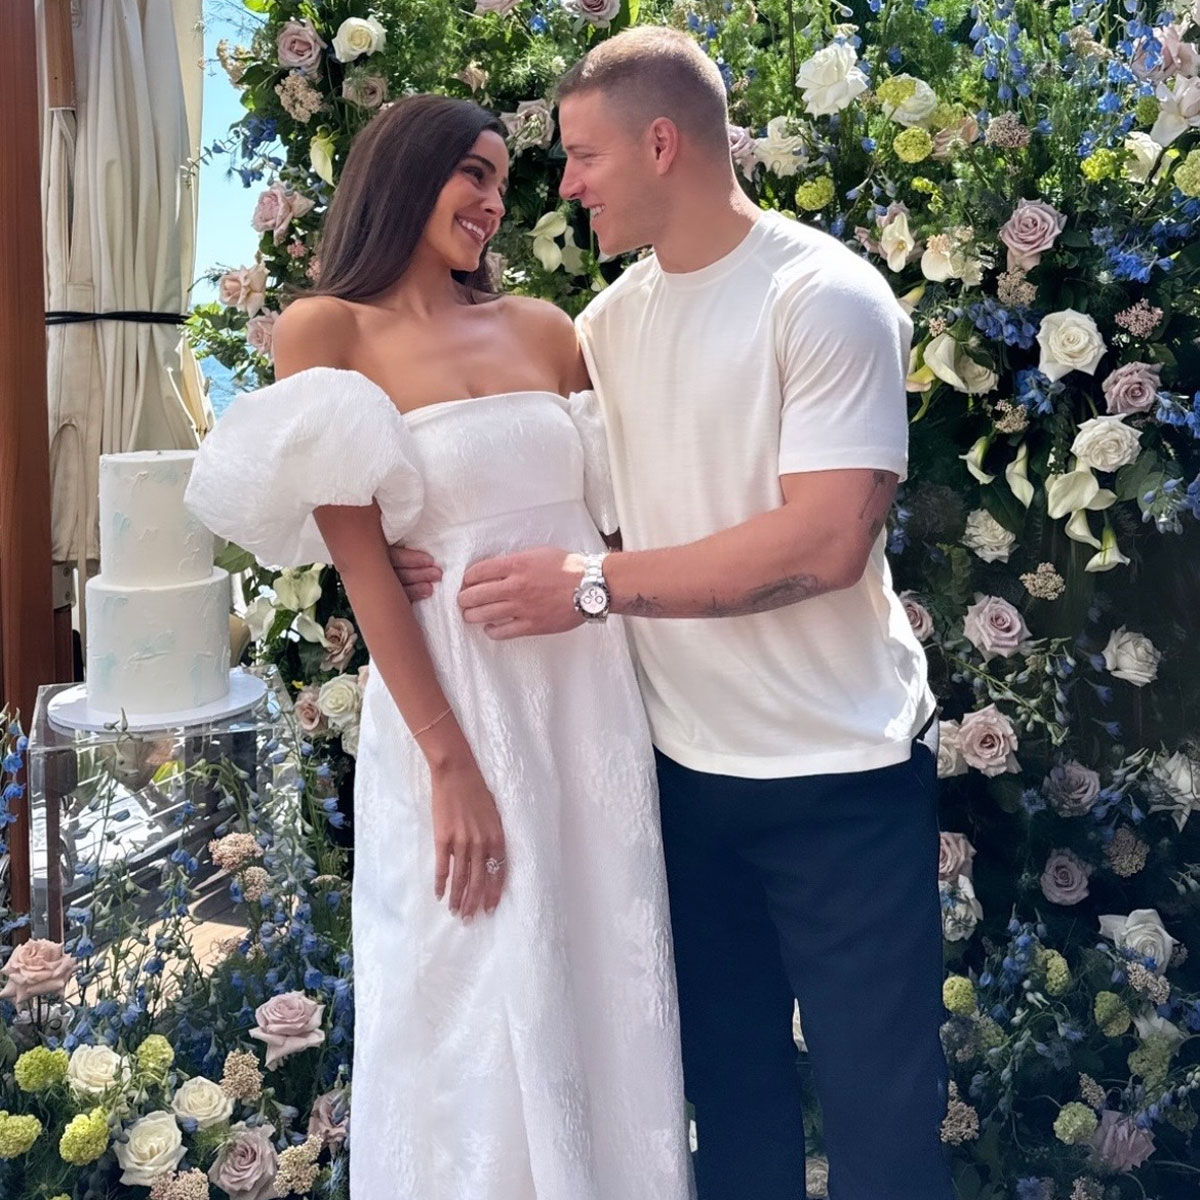 Why Olivia Culpo Didn't Want Her Wedding Dress to “Exude Sex”